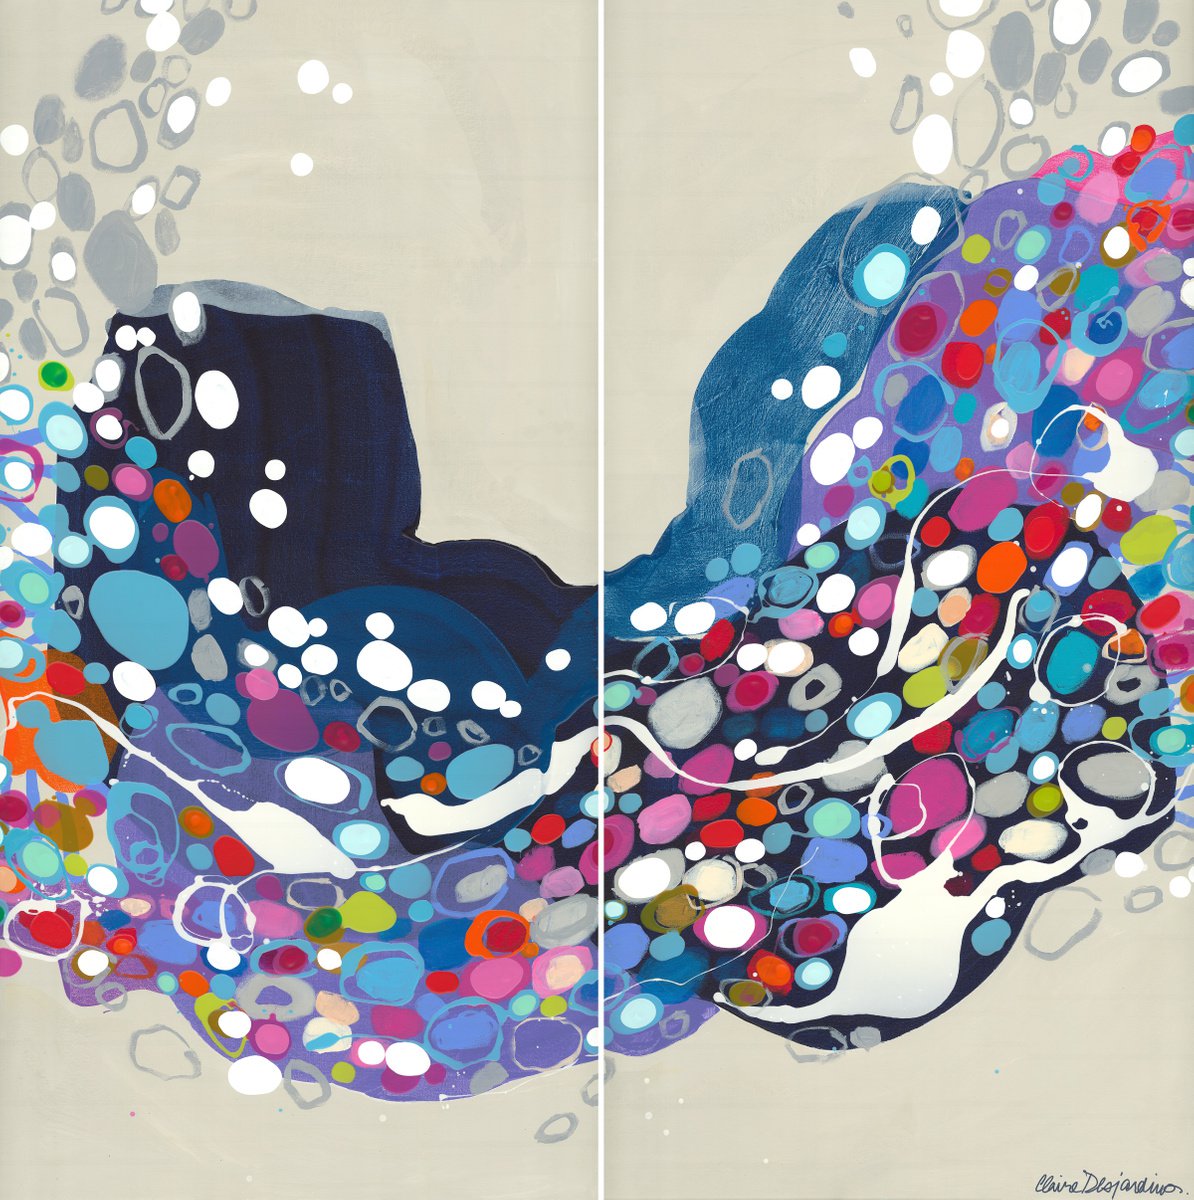 Then You Said Hello (Diptych) by Claire Desjardins